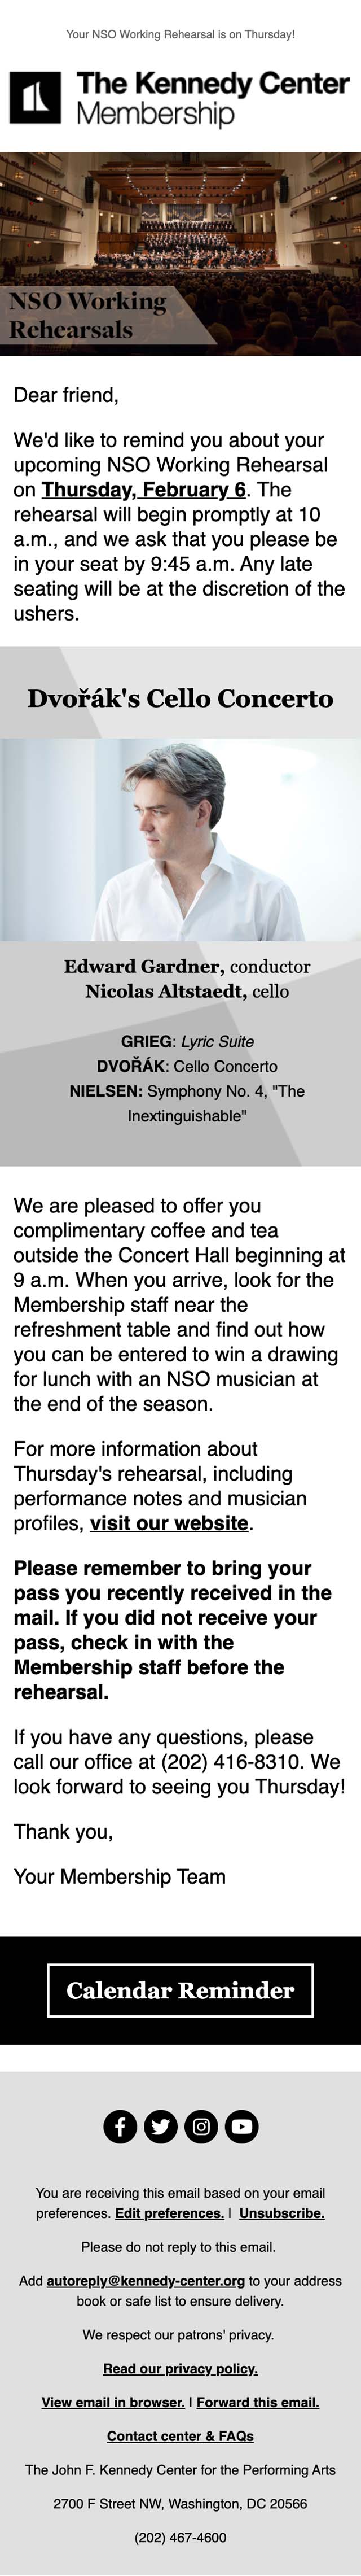 Member Benefit Alert: Your NSO Working Rehearsal is Thursday! - mobile view